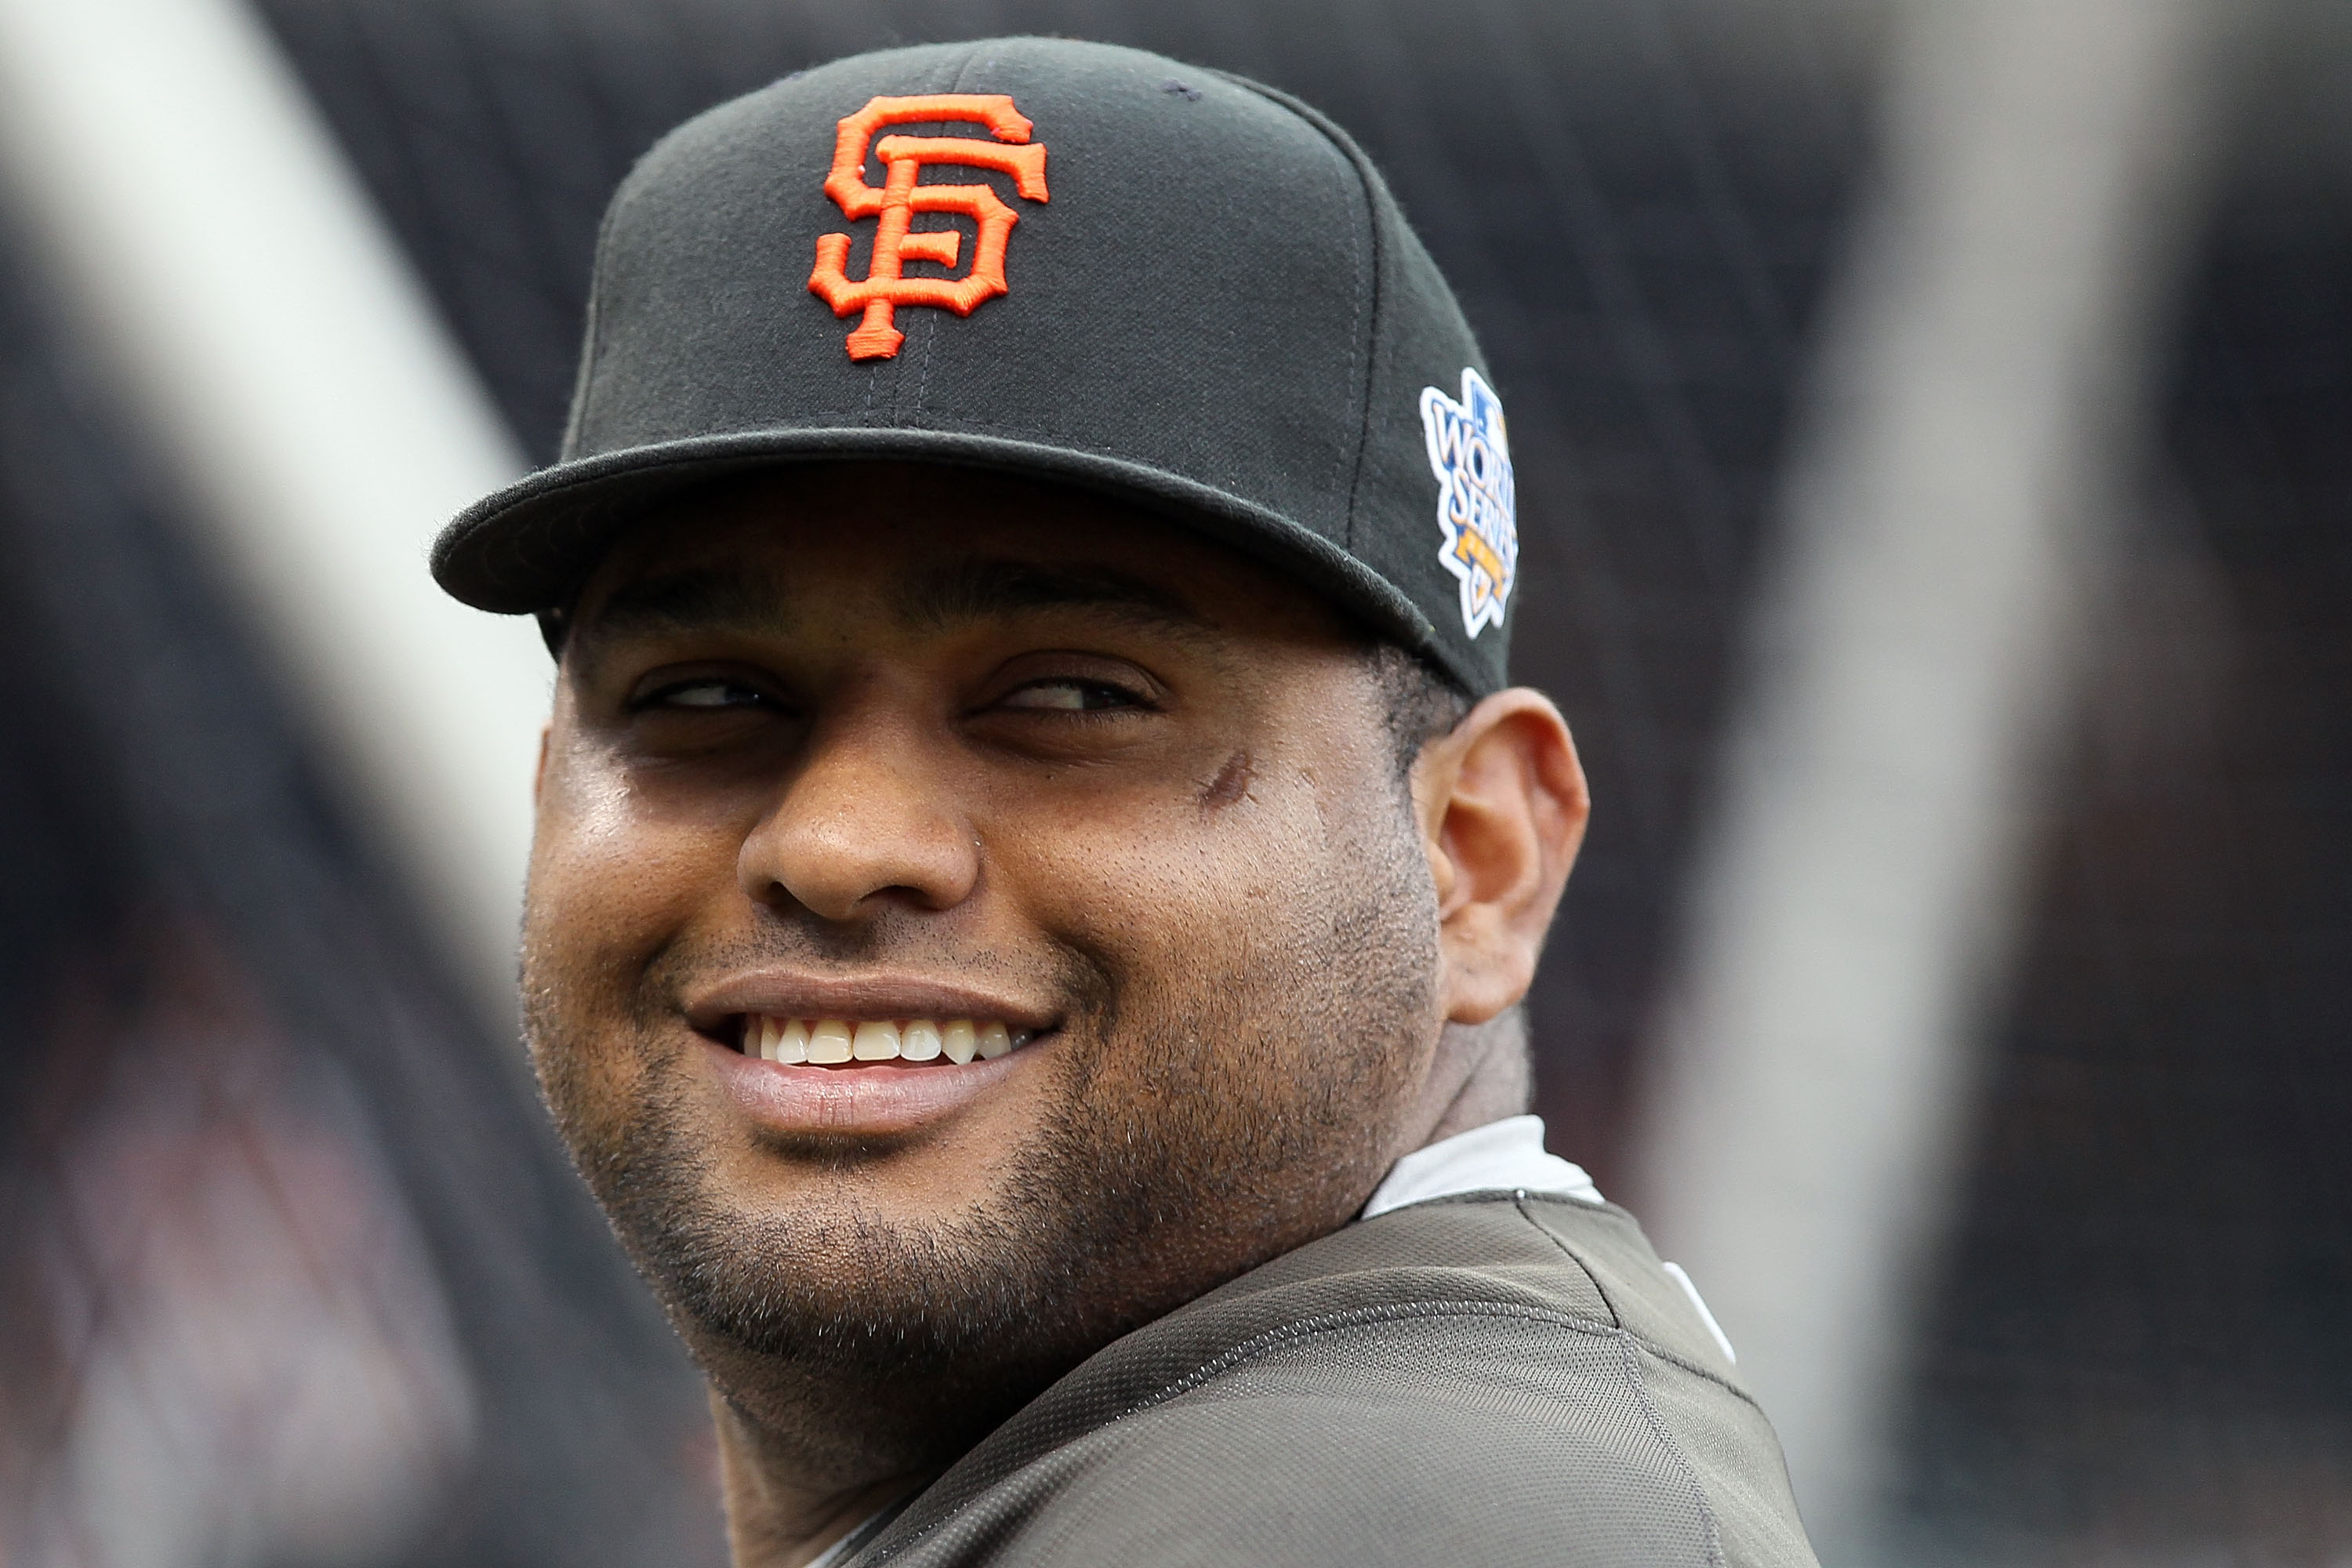 SAN FRANCISCO - OCTOBER 27:  Pablo Sandoval #48 of the San Francisco Giants smiles during batting practice before Game One of the 2010 MLB World Series against the Texas Rangers at AT&T Park on October 27, 2010 in San Francisco, California.  (Photo by Els